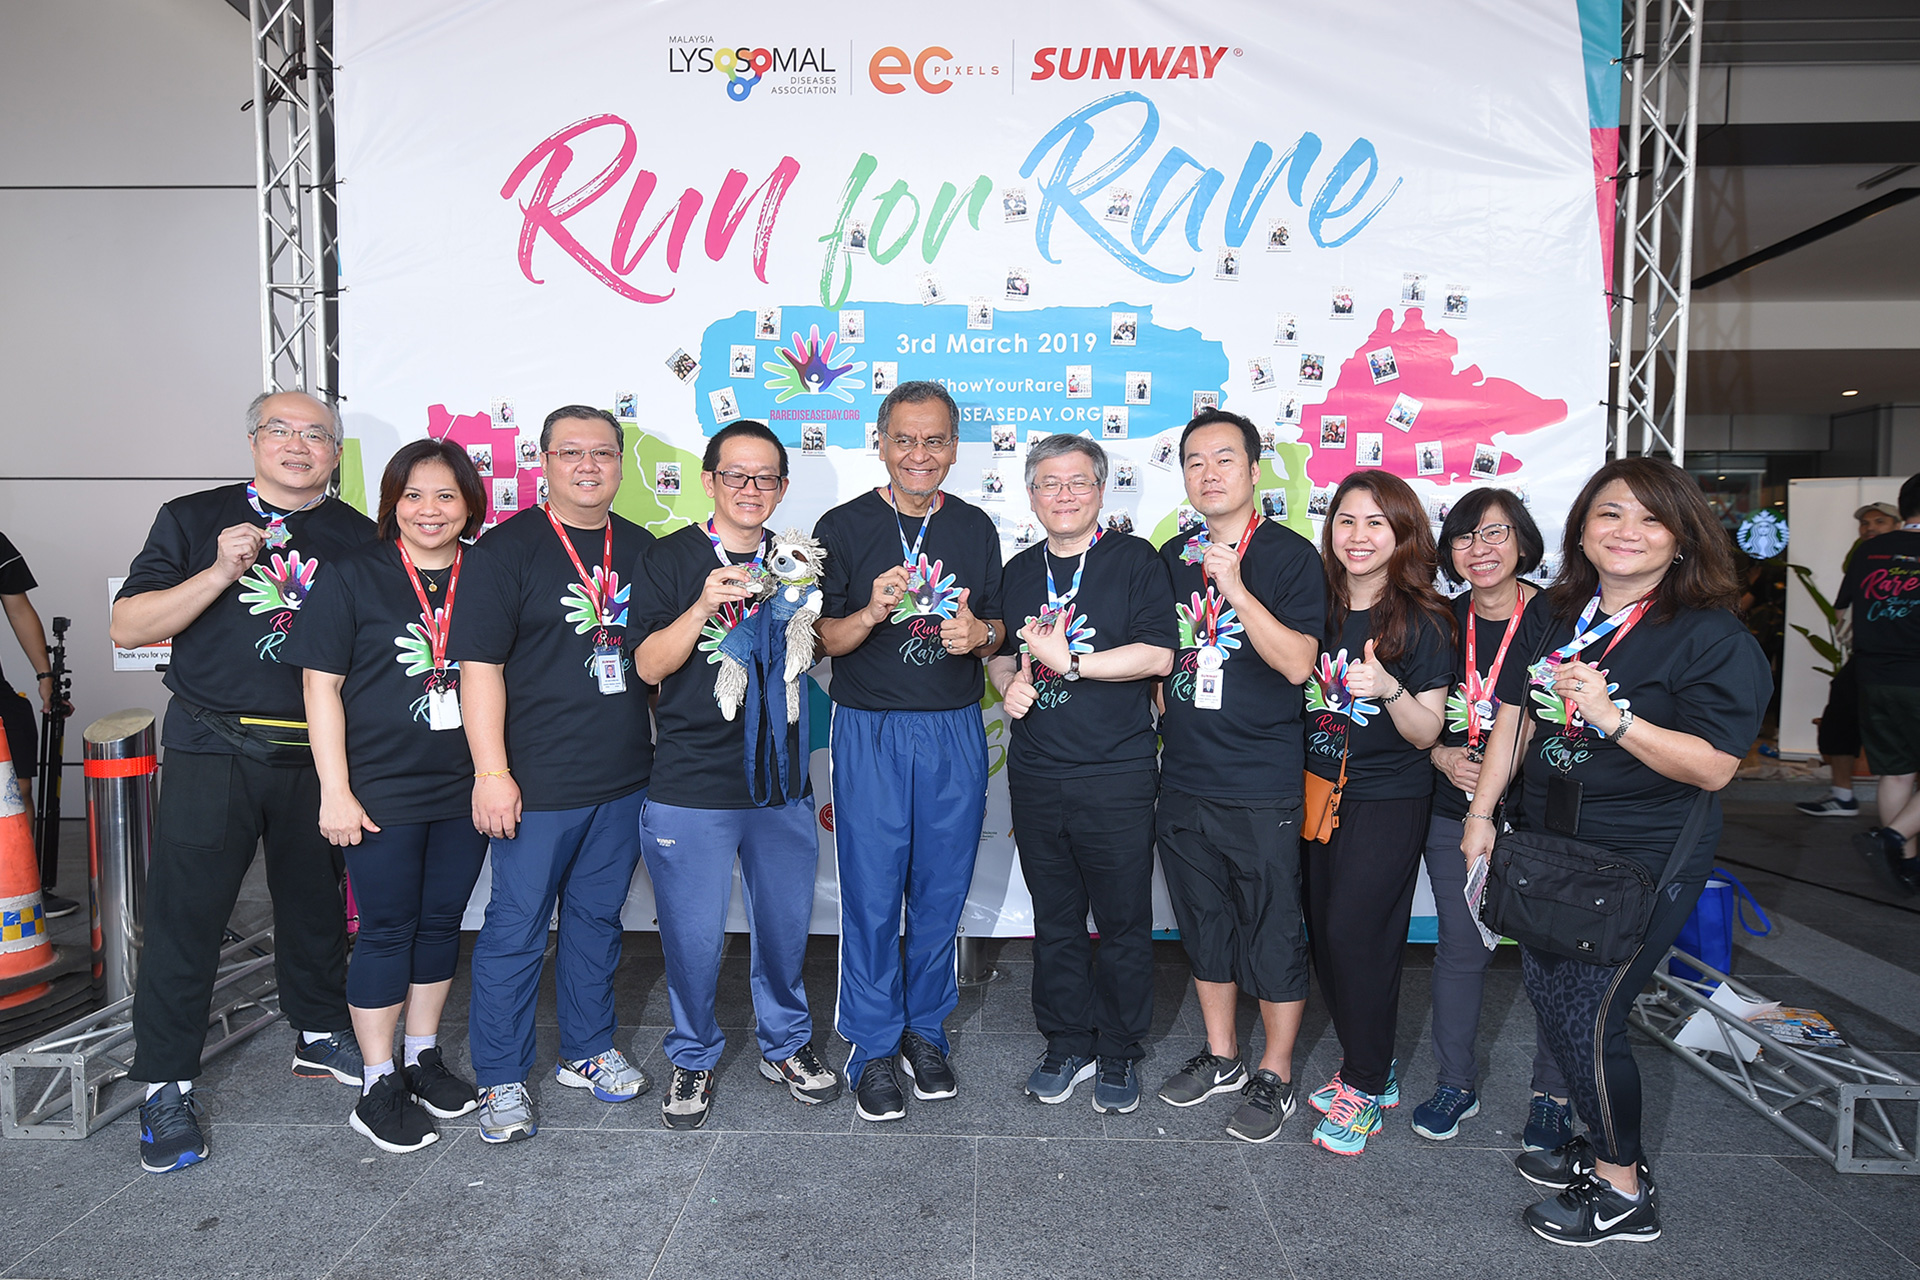 Sunway Partners MLDA to Create Unique Rare Disease Experience in Conjunction with World Rare Disease Day 2019